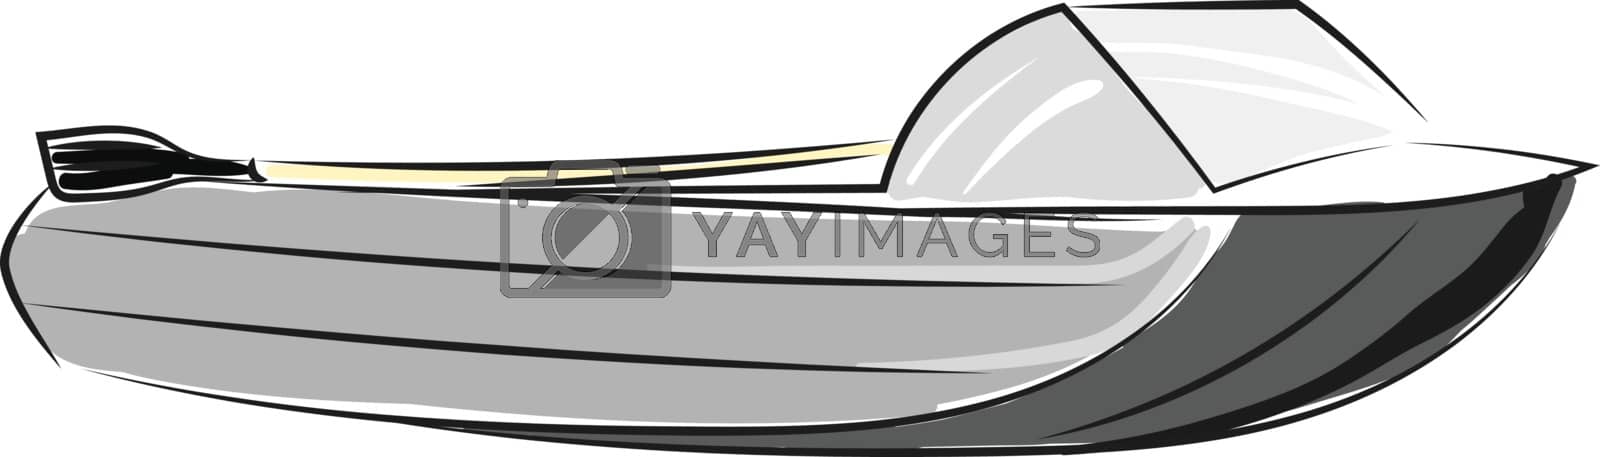 Royalty free image of Gray speed boat, vector or color illustration.  by Morphart